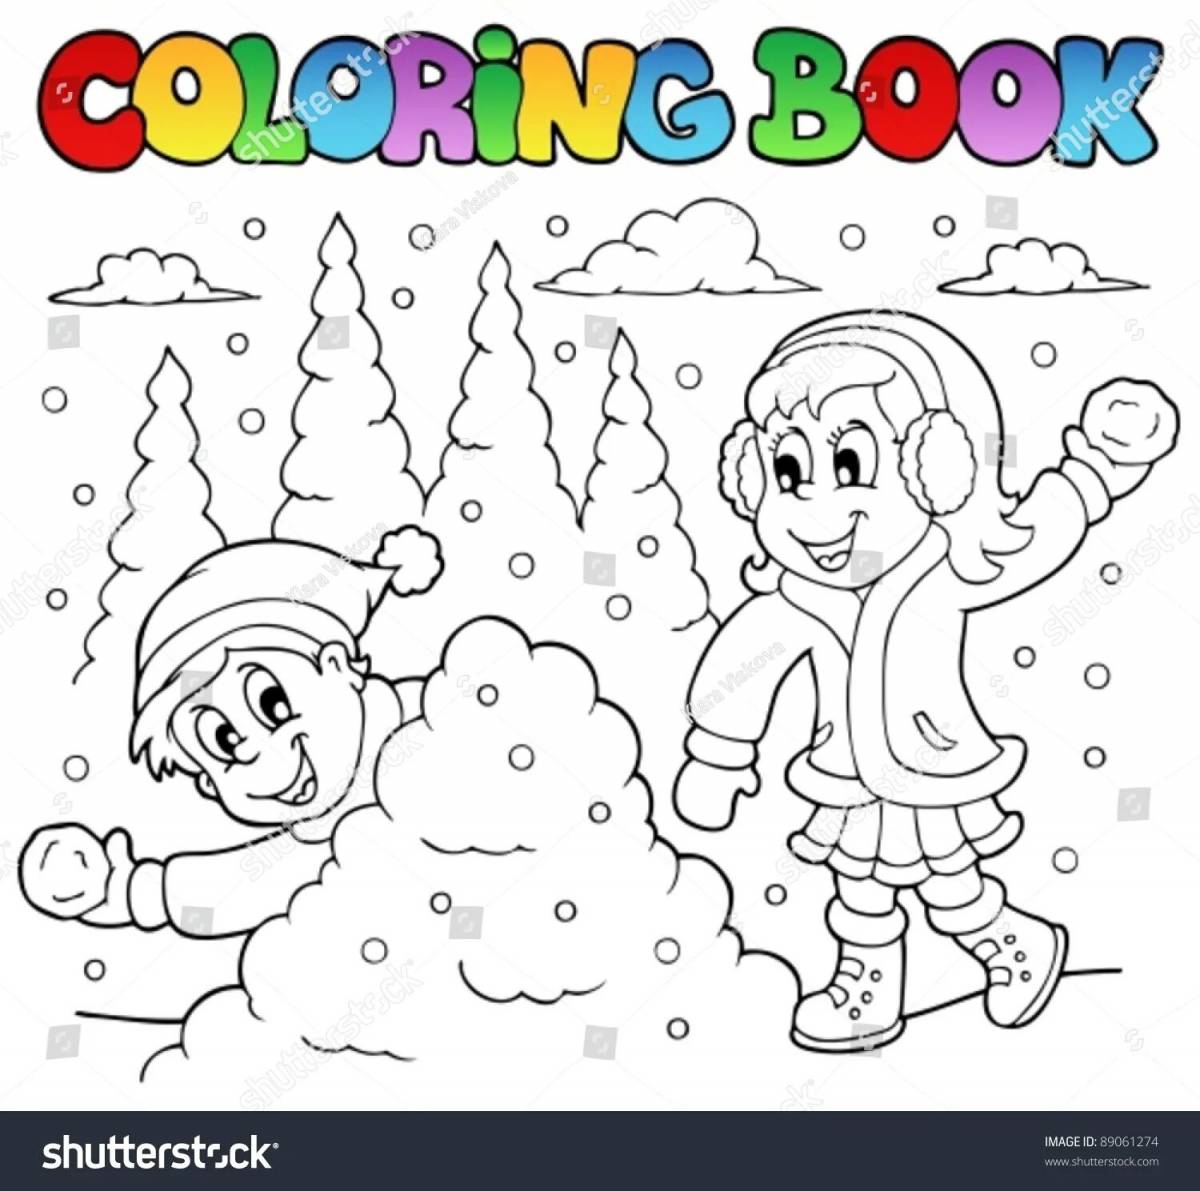 Delightful coloring of snowballs and mud